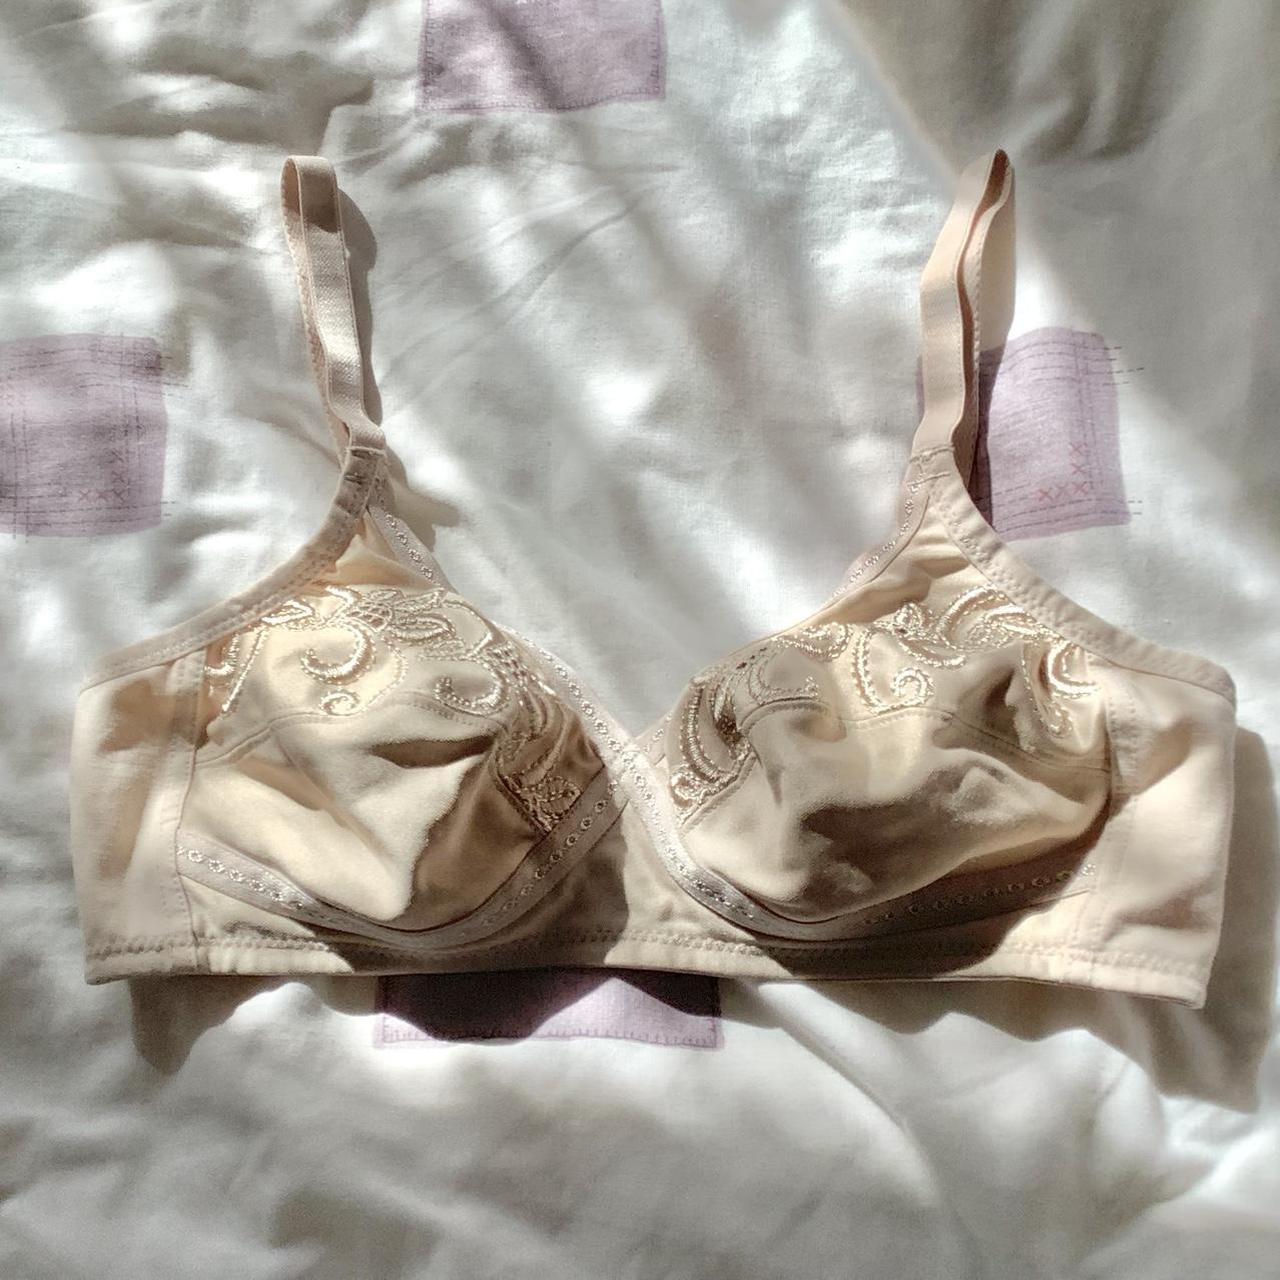 M&S Strapless Bra Laced Nude RRP £25 Size 32D - Depop